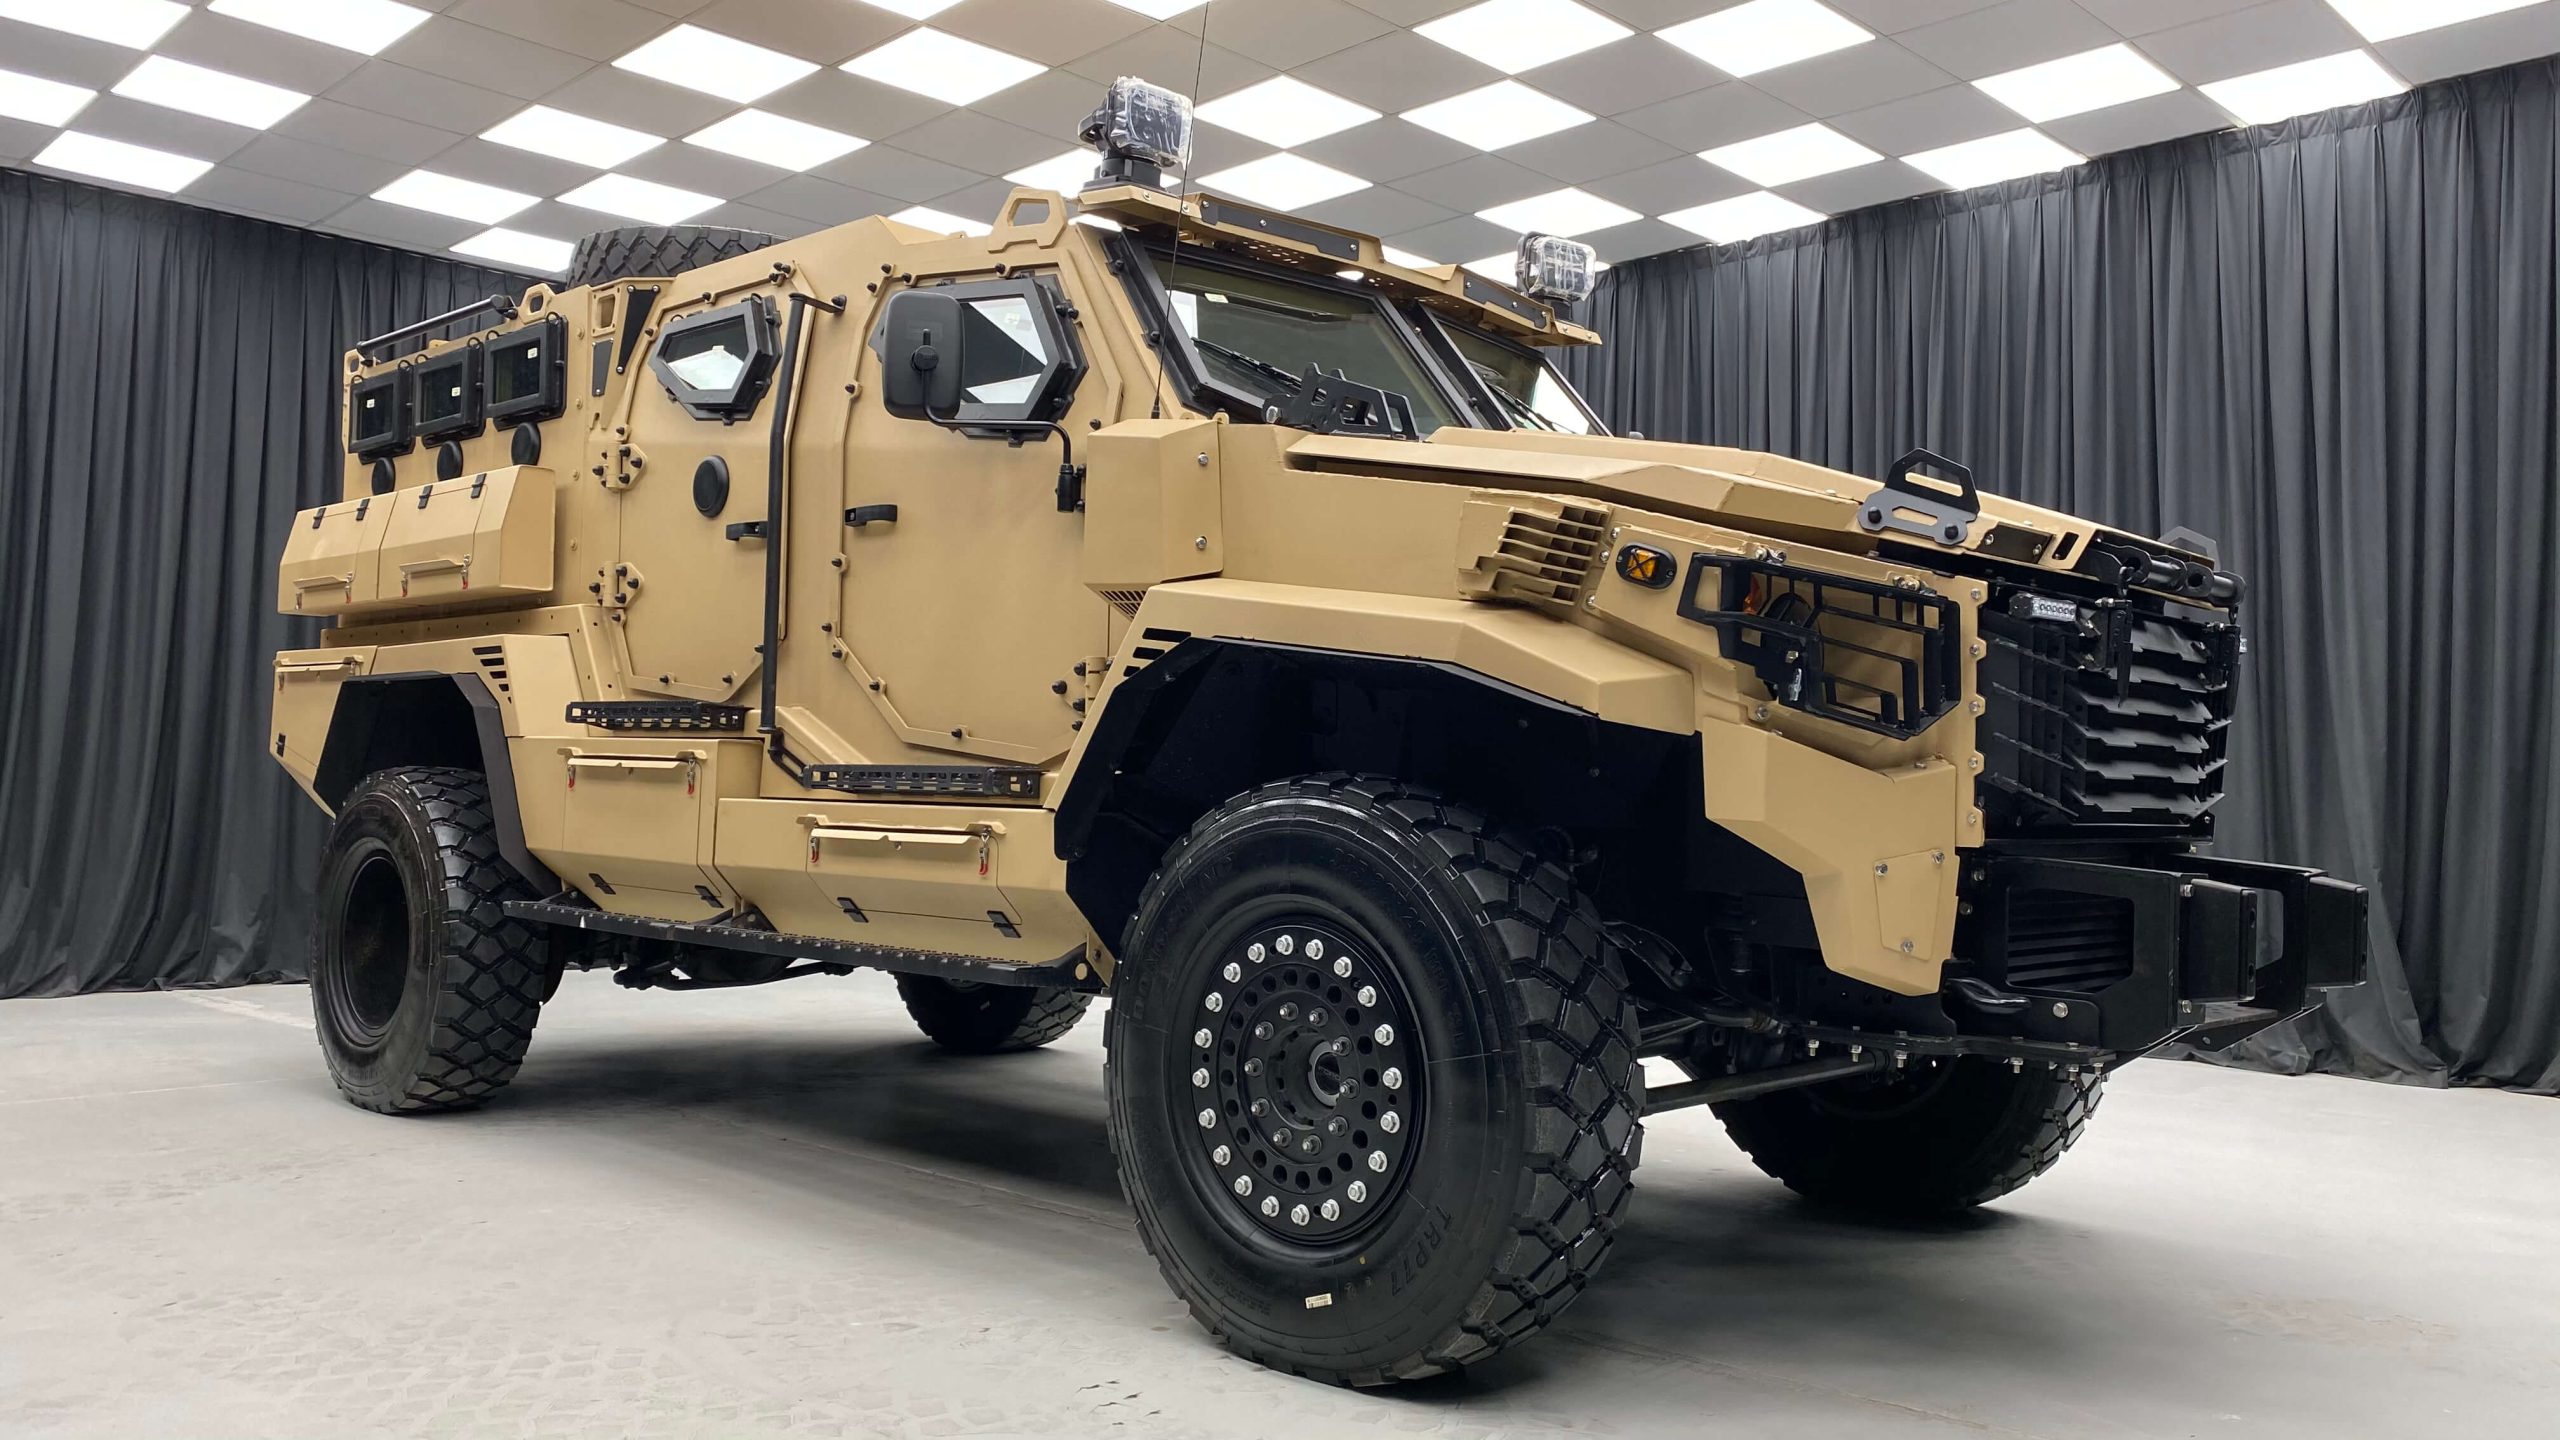 The BATT UMG armored personnel carrier.